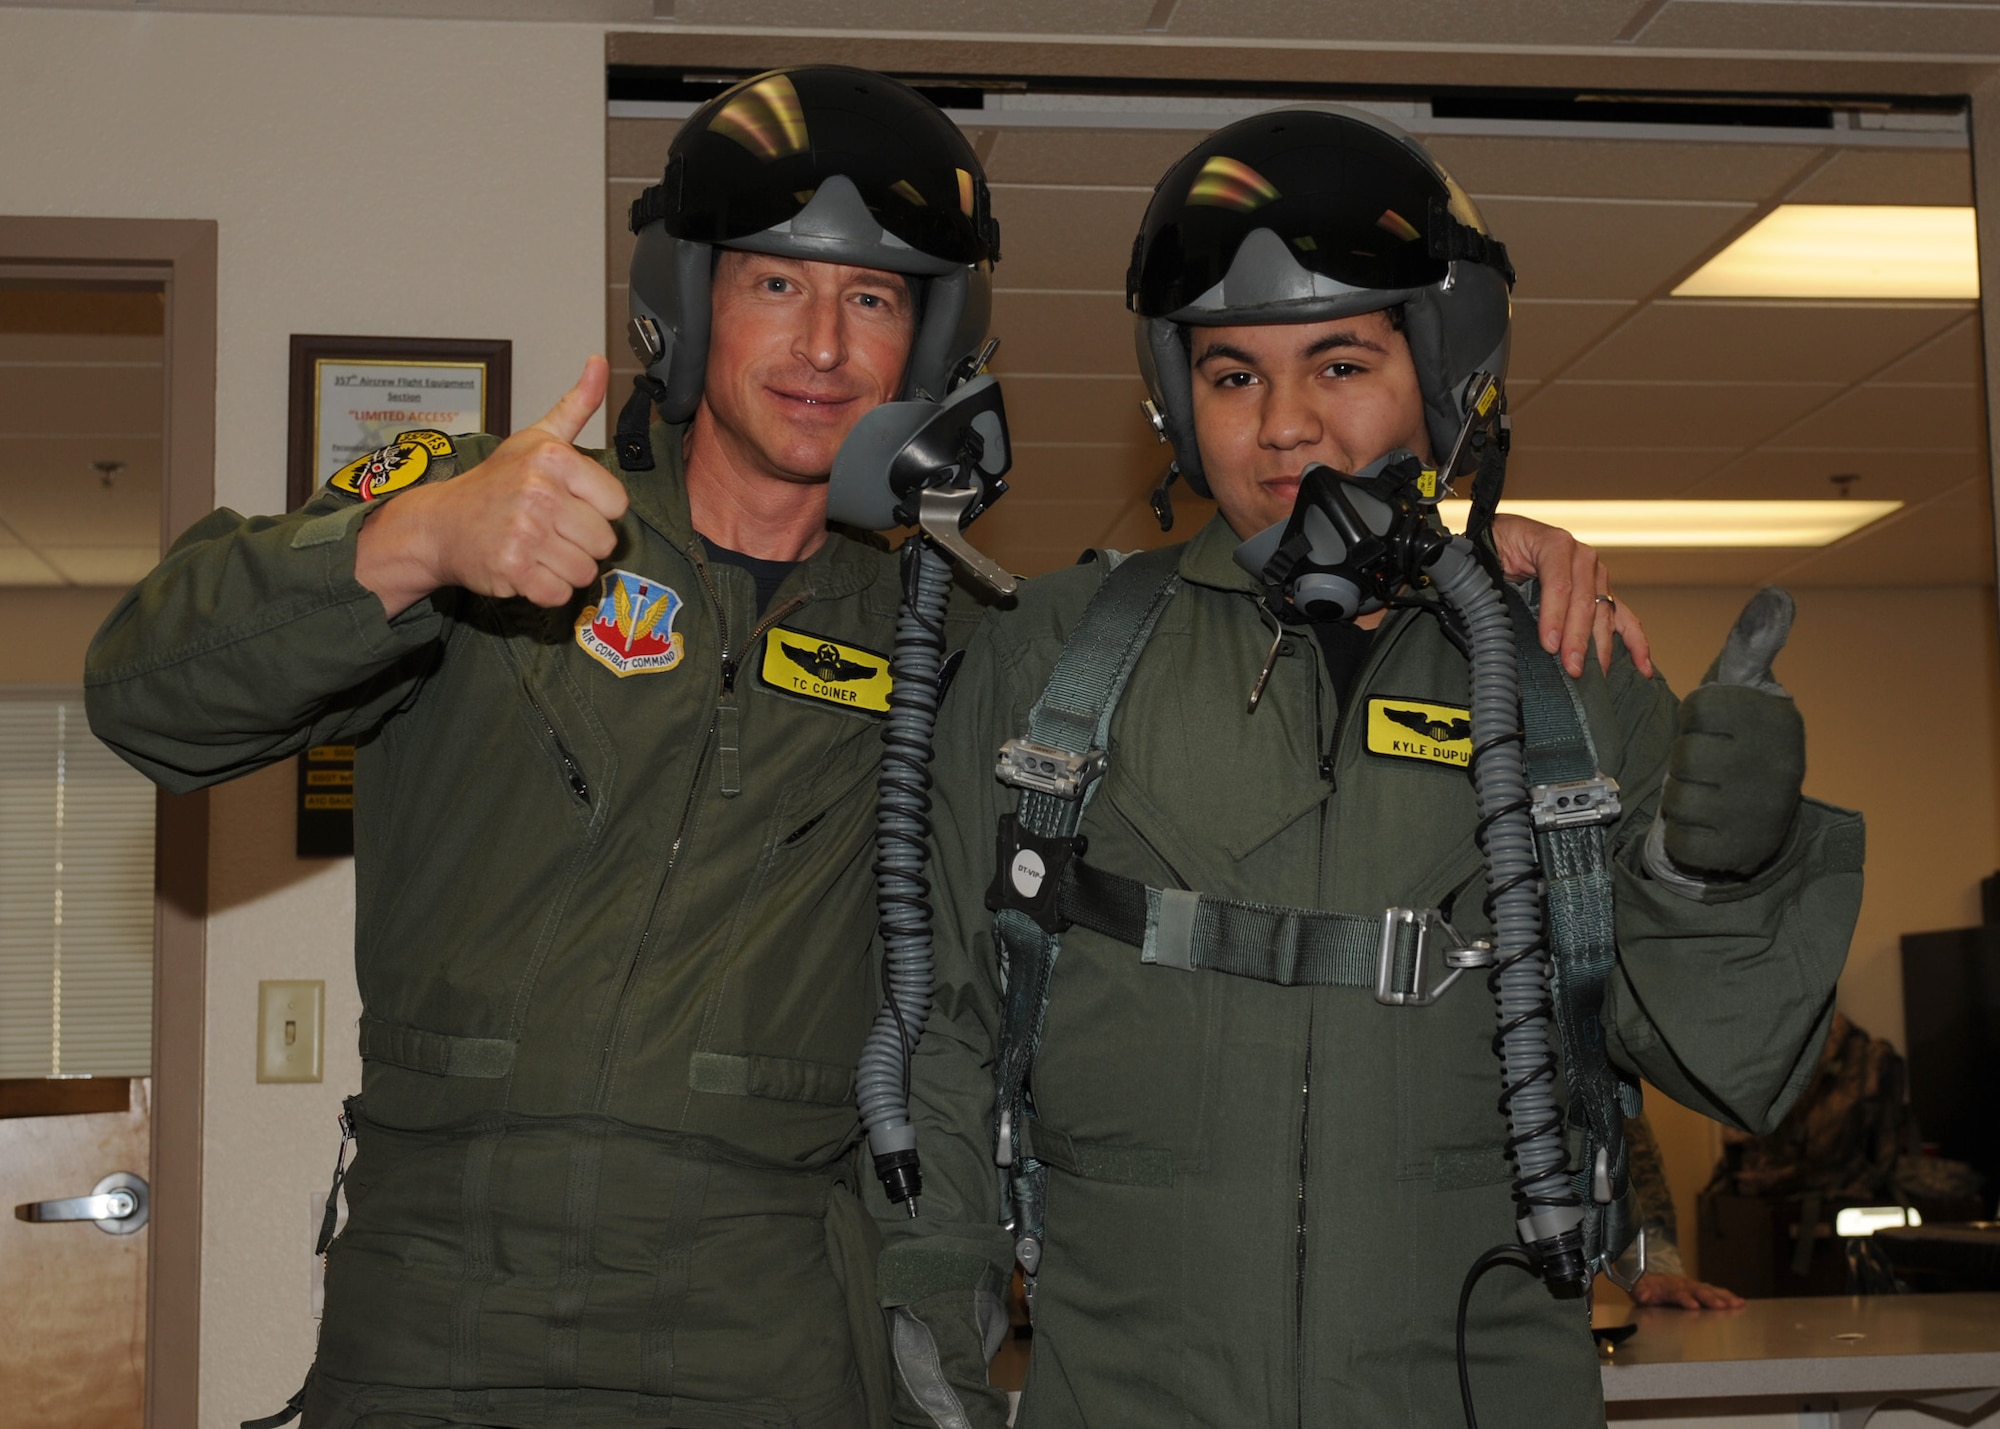 U.S. Air Force Lt. Col. Theodore Coiner, 357th Fighter Squadron assistant director of operations, poses with Kyle Dupuis in the 357th Fighter Squadron life support room on Davis-Monthan Air Force Base, Ariz. Oct. 21, 2011. Kyle was made an honorary pilot for the Pilot for a Day program. (U.S. Air Force photo by Airman 1st Class Timothy D. Moore/Released)